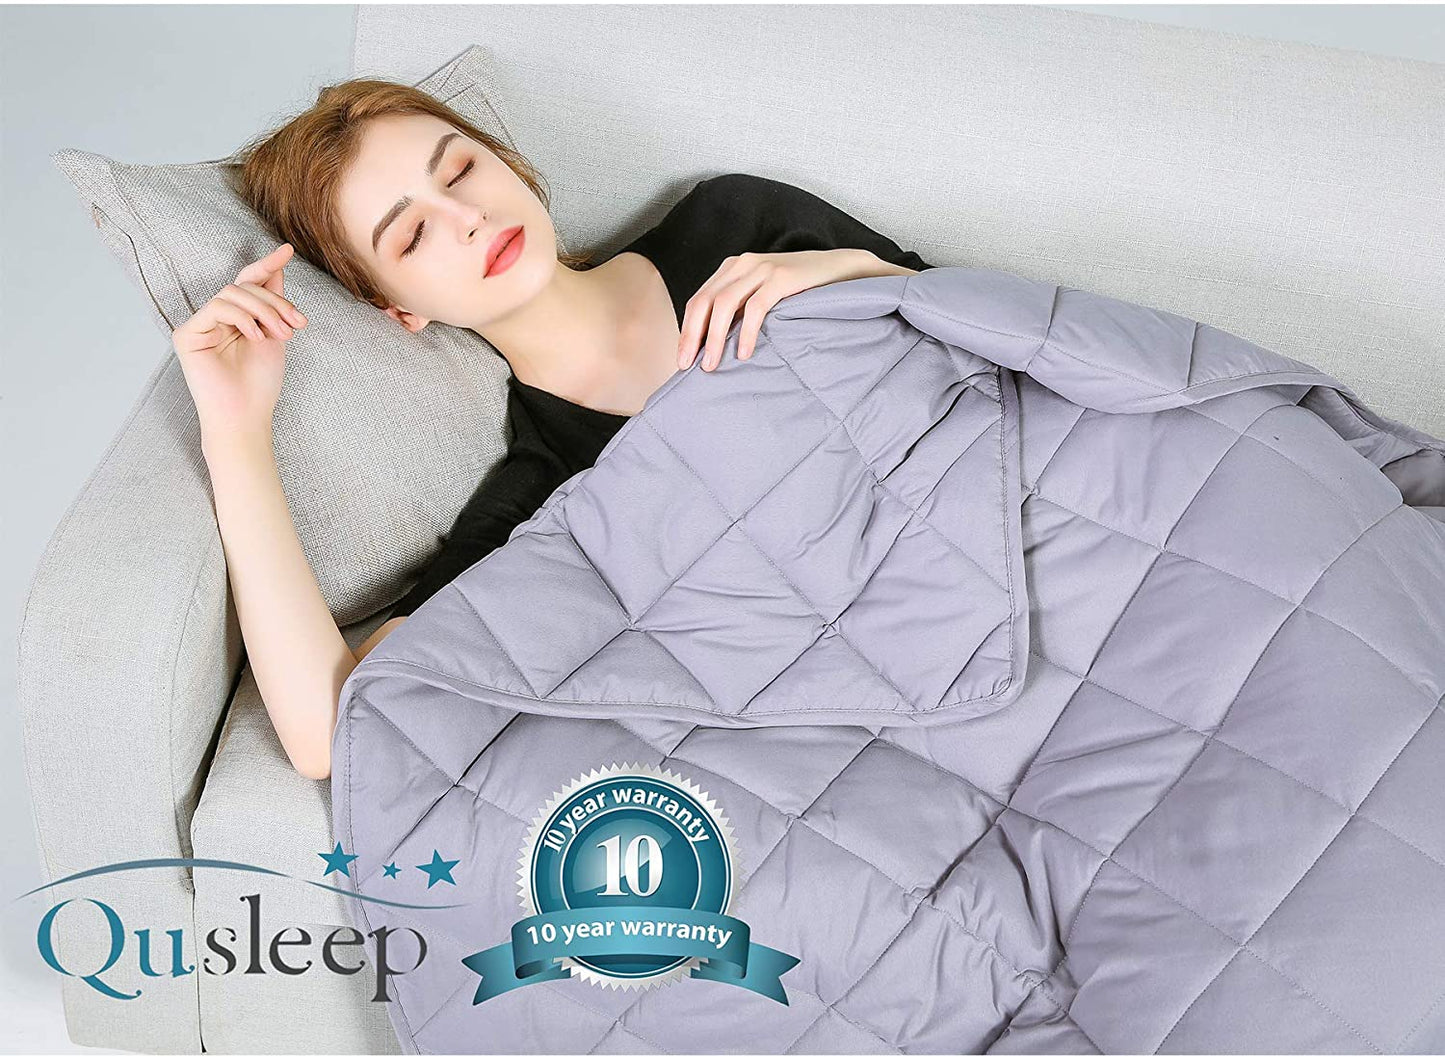 Qusleep Cooling Weighted Blanket - 60''80'' 15LB Queen Size - Calm, Sleep Better and Relax Naturally for Adult and Kids